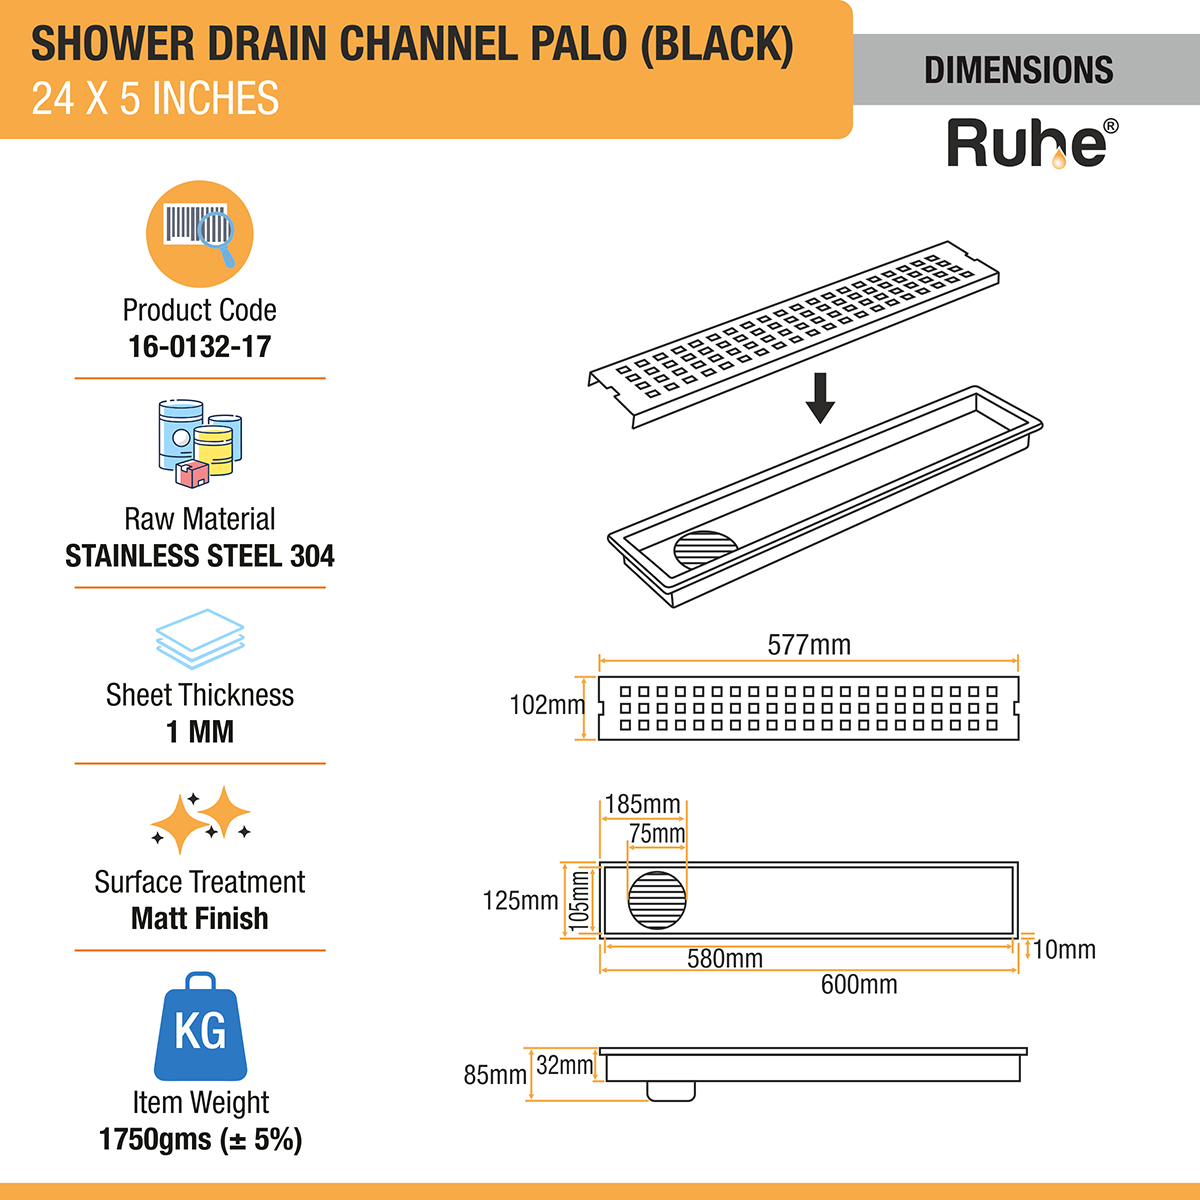 Palo Shower Drain Channel (24 x 5 Inches) Black PVD Coated dimensions and sizes